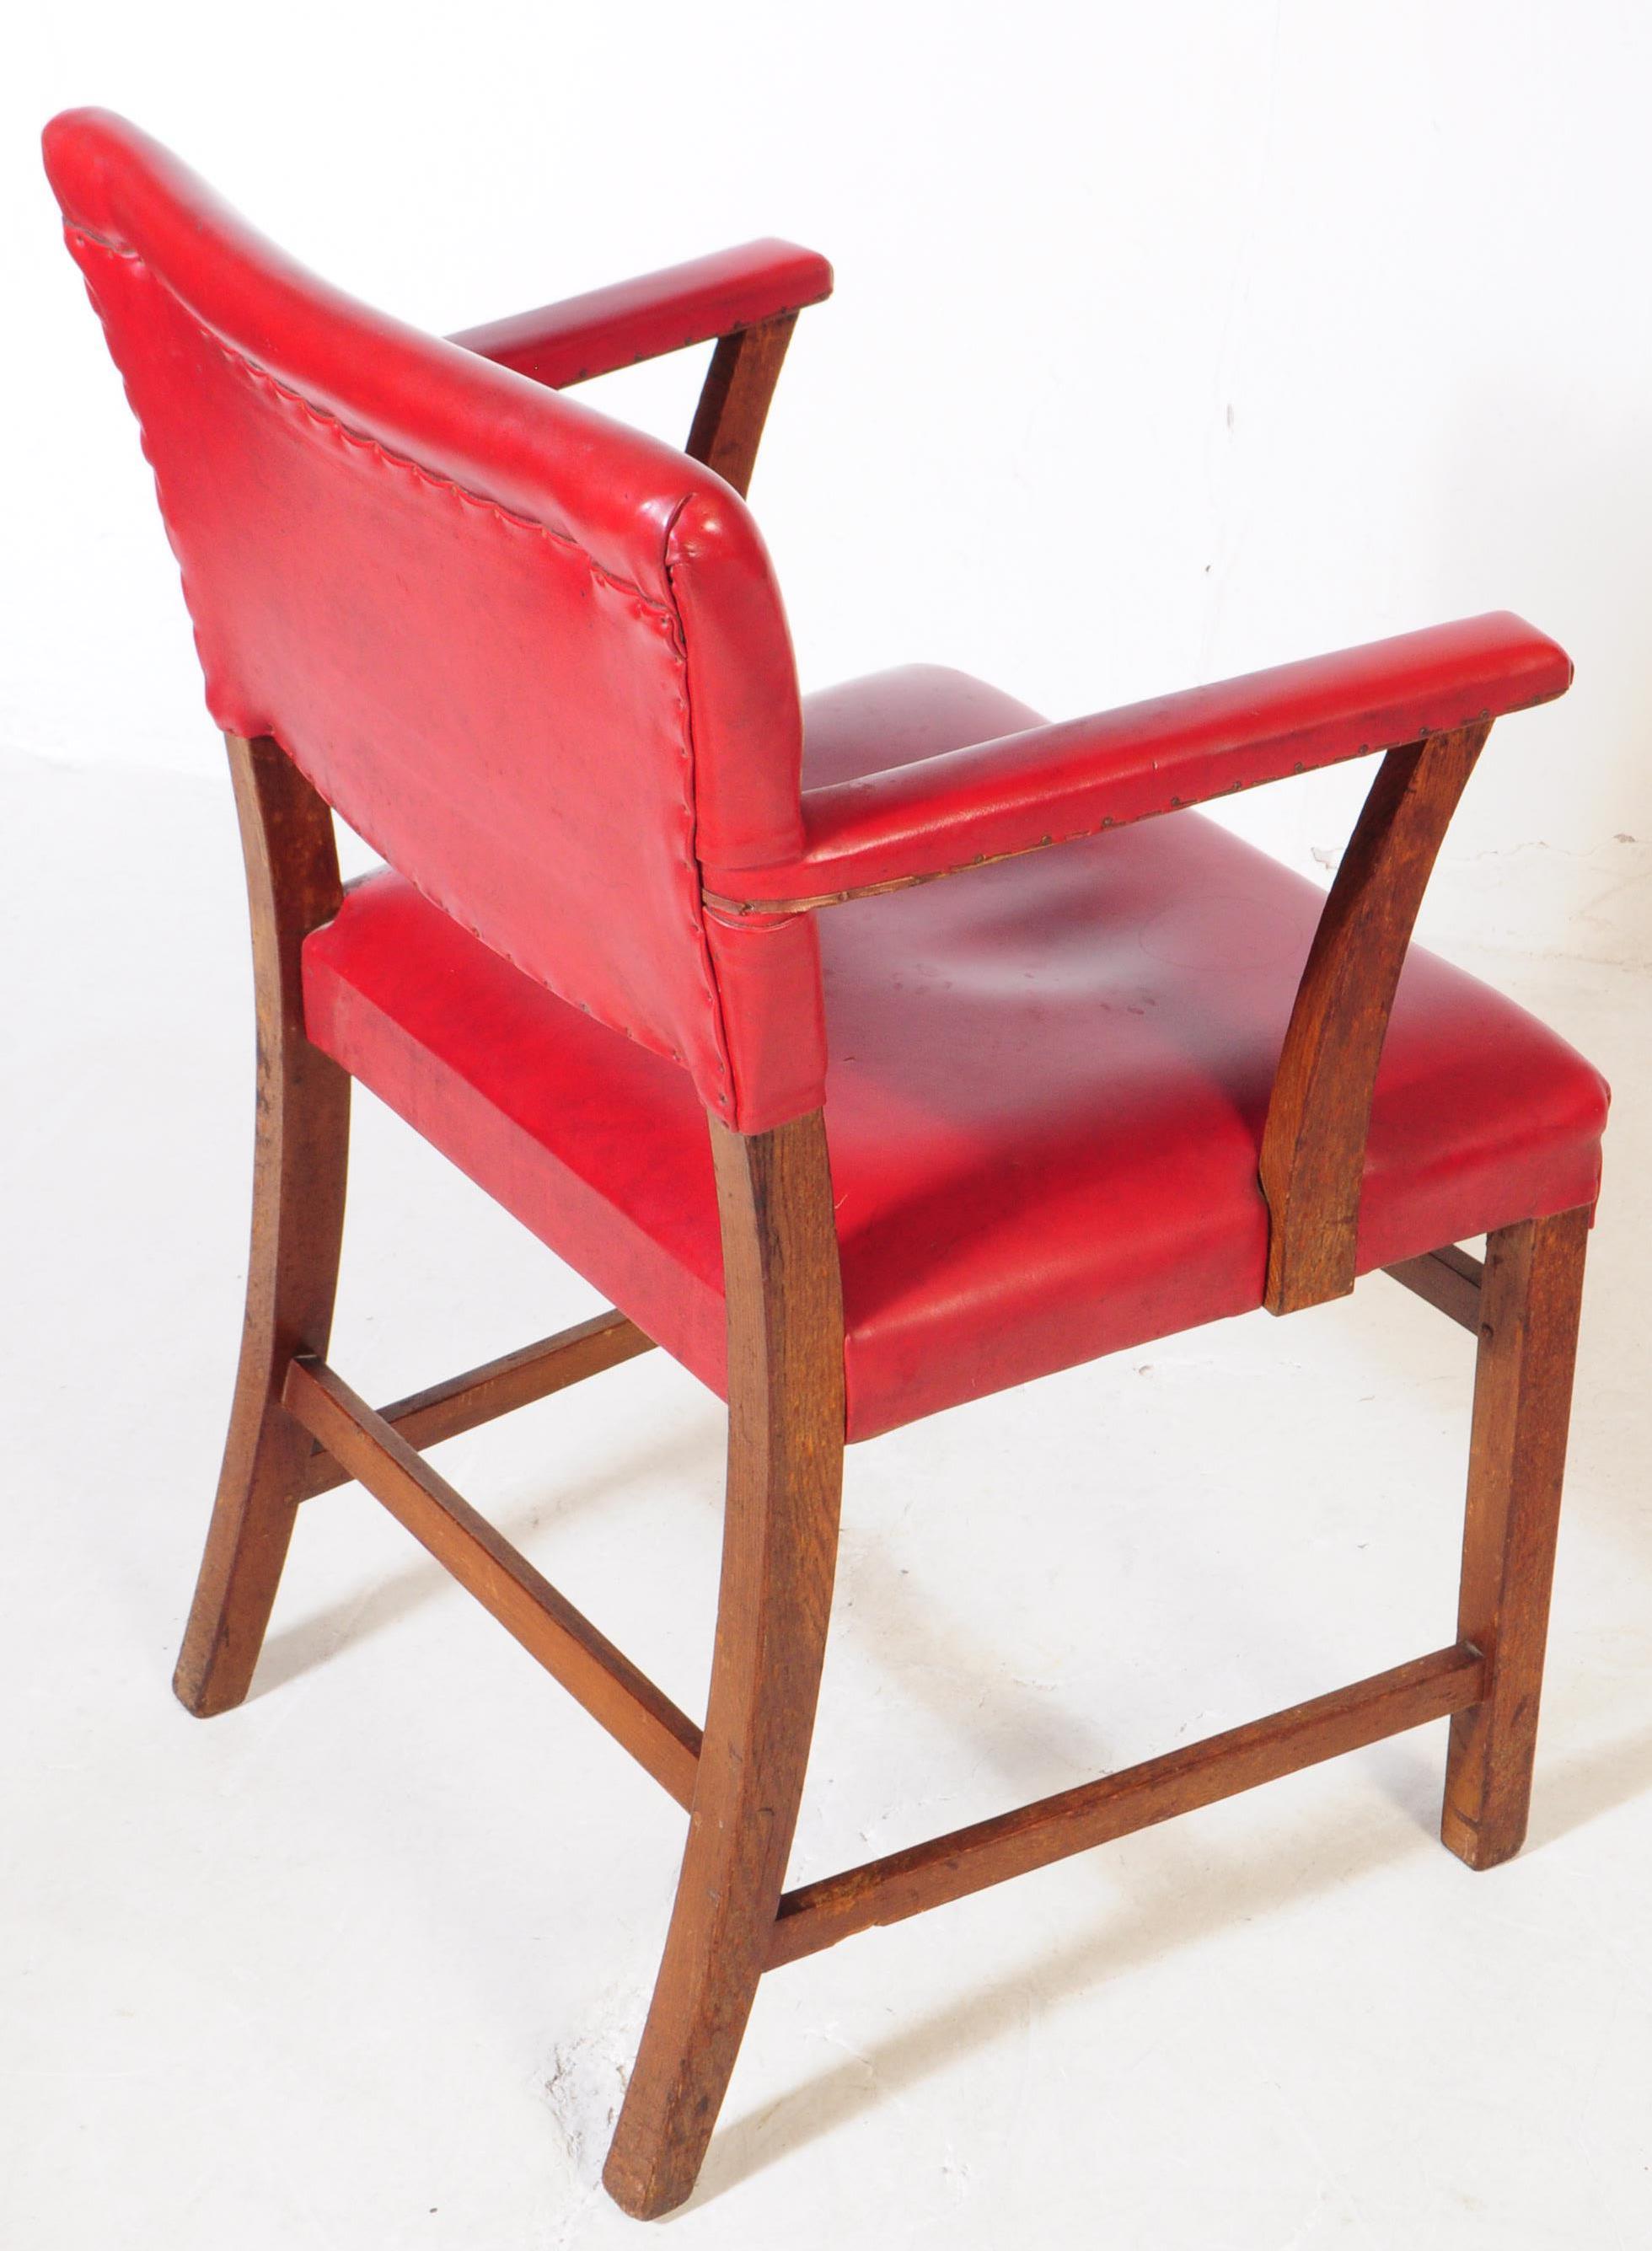 PAIR OF VINTAGE 20TH CENTURY RED VINYL CARVER ARMCHAIRS - Image 4 of 4